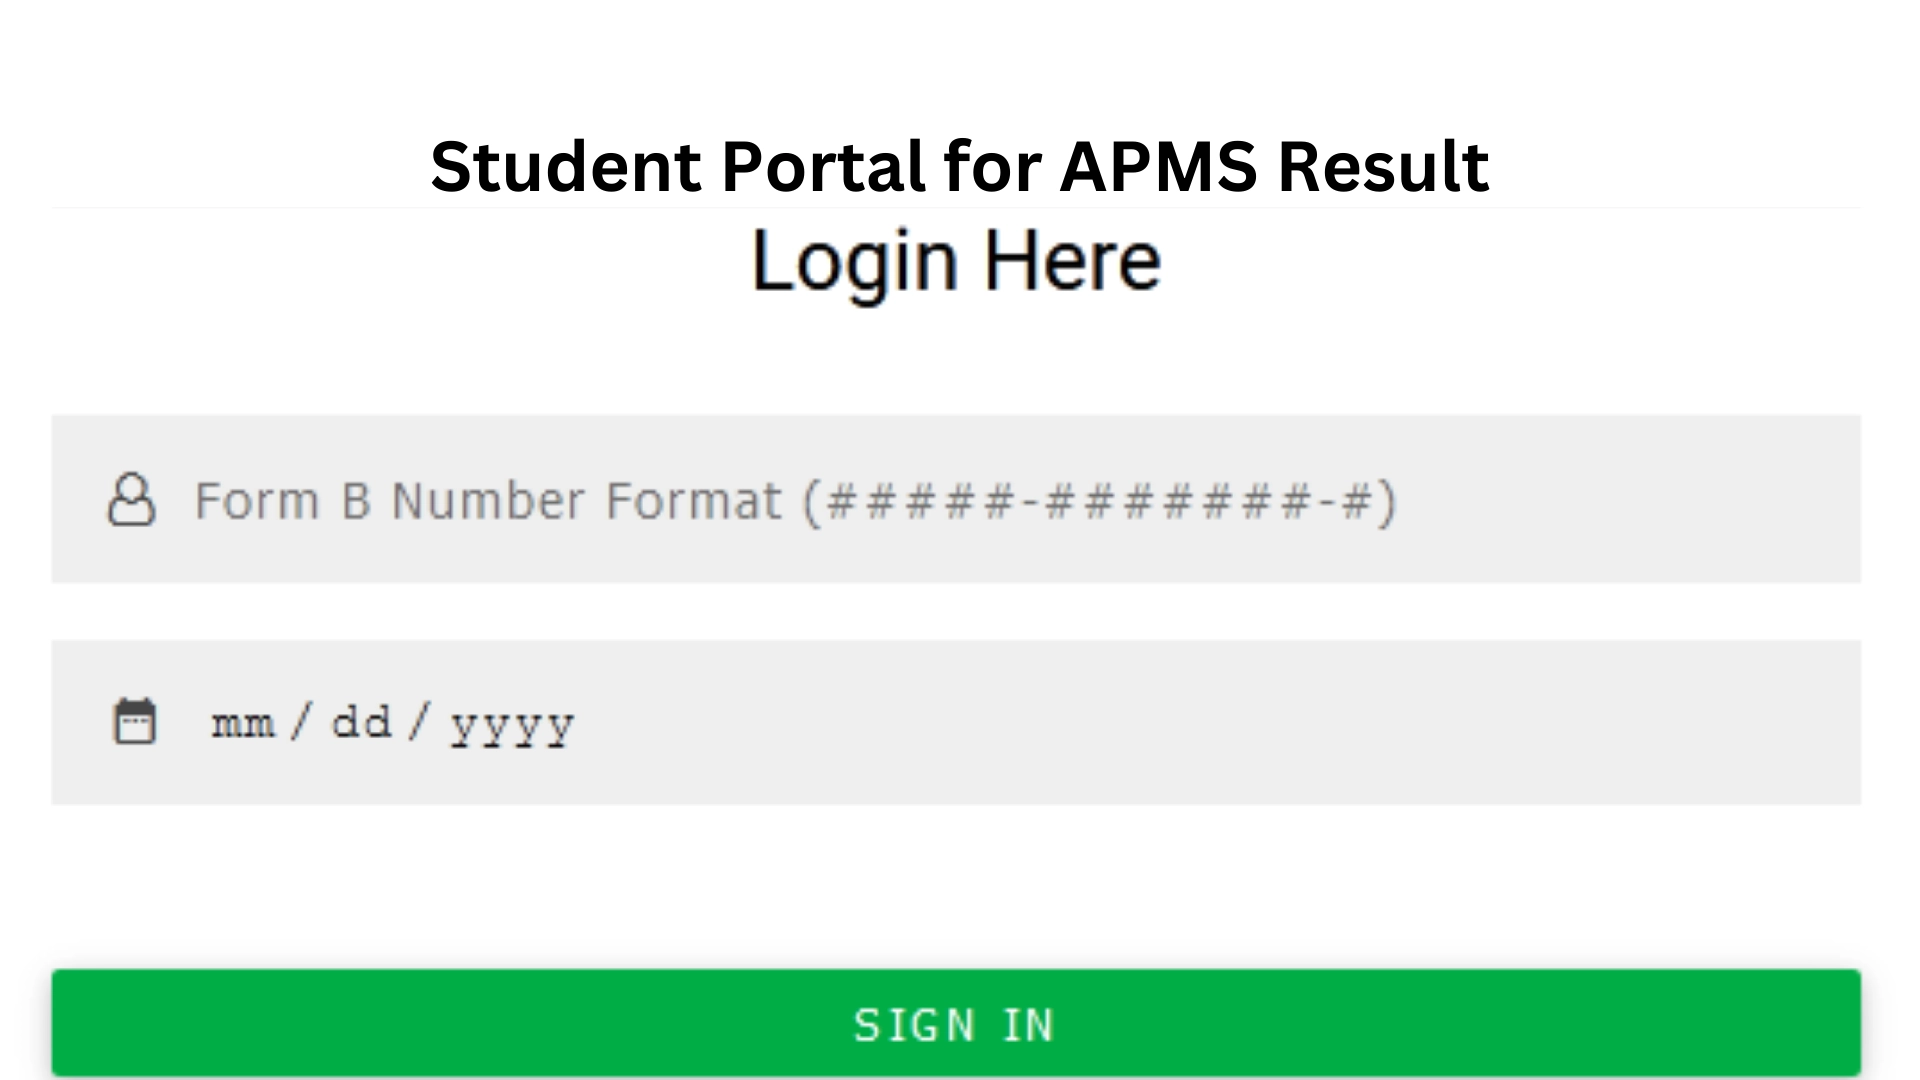 Student Portal for APMS Result